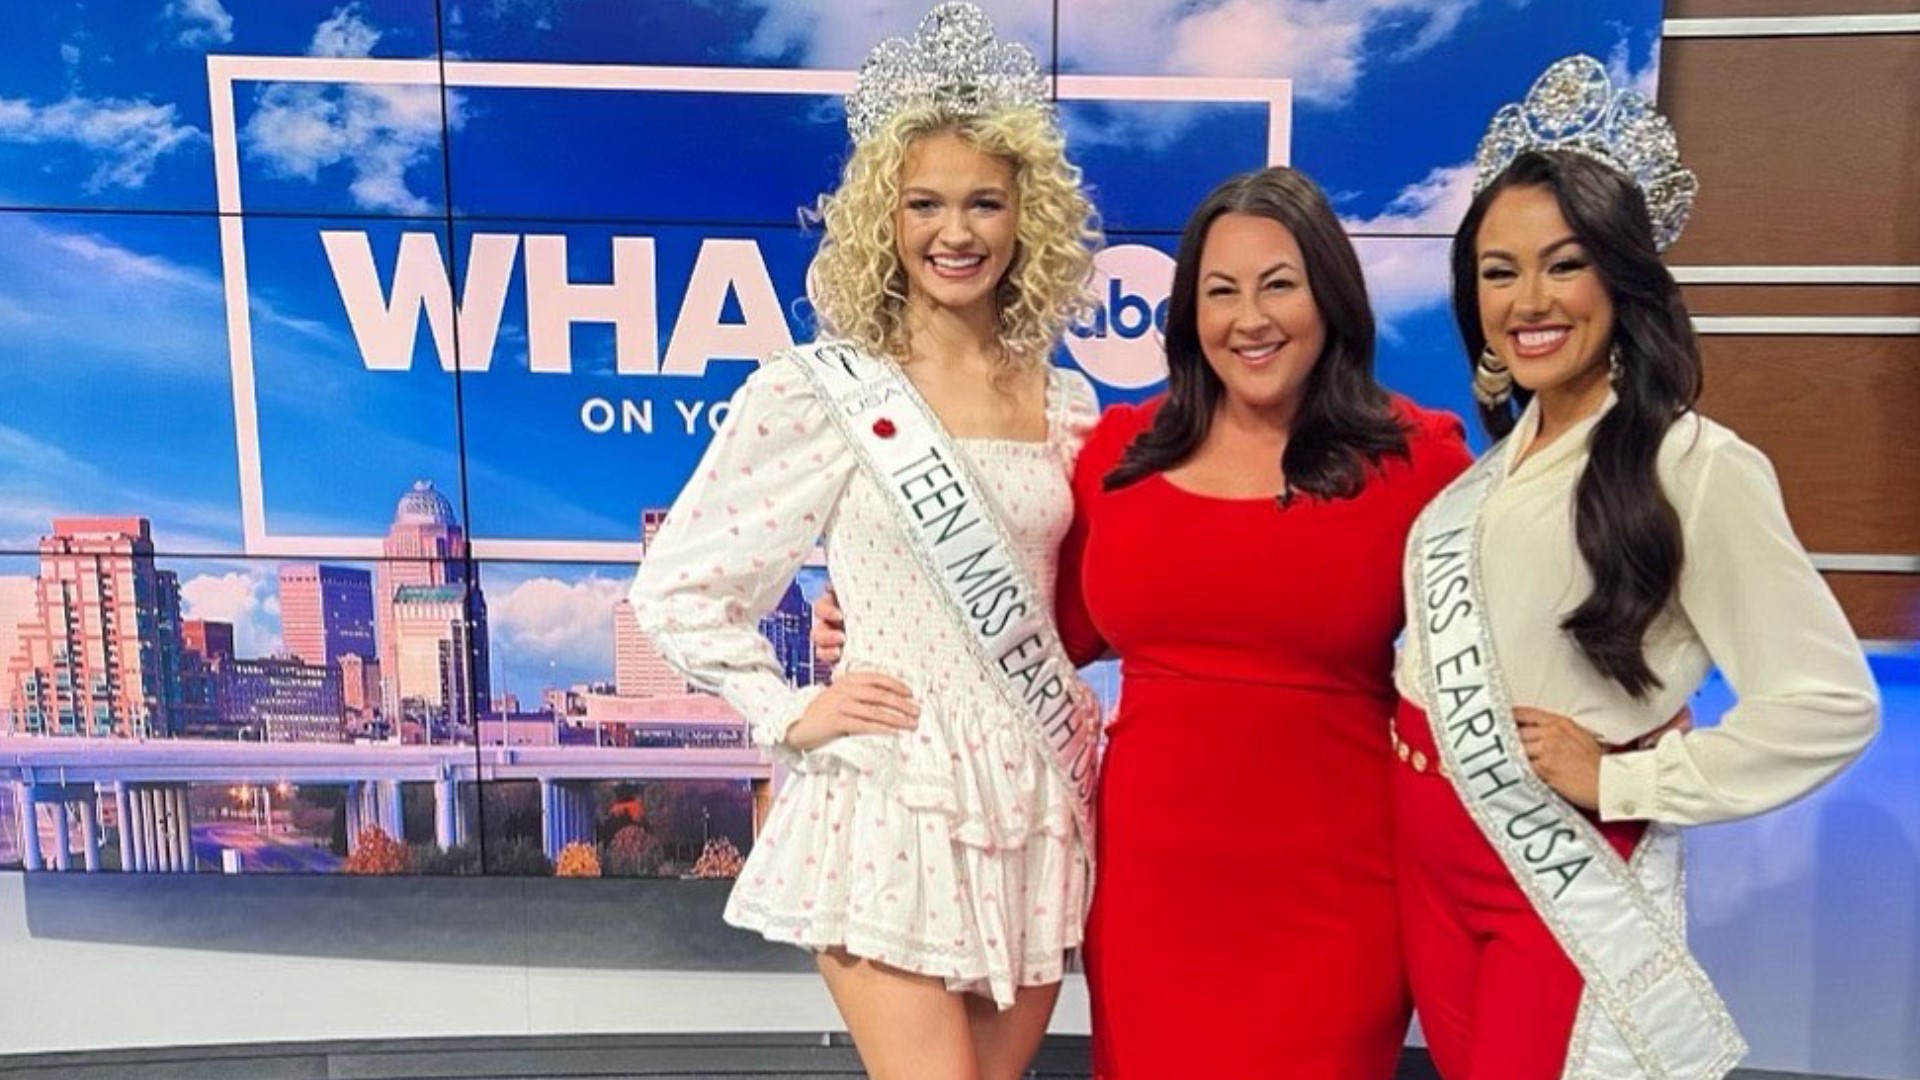 Miss Earth USA Danielle Mullins and Teen Miss Earth USA Tayan Stansfield spoke about what it means to represent the commonwealth and what comes next!